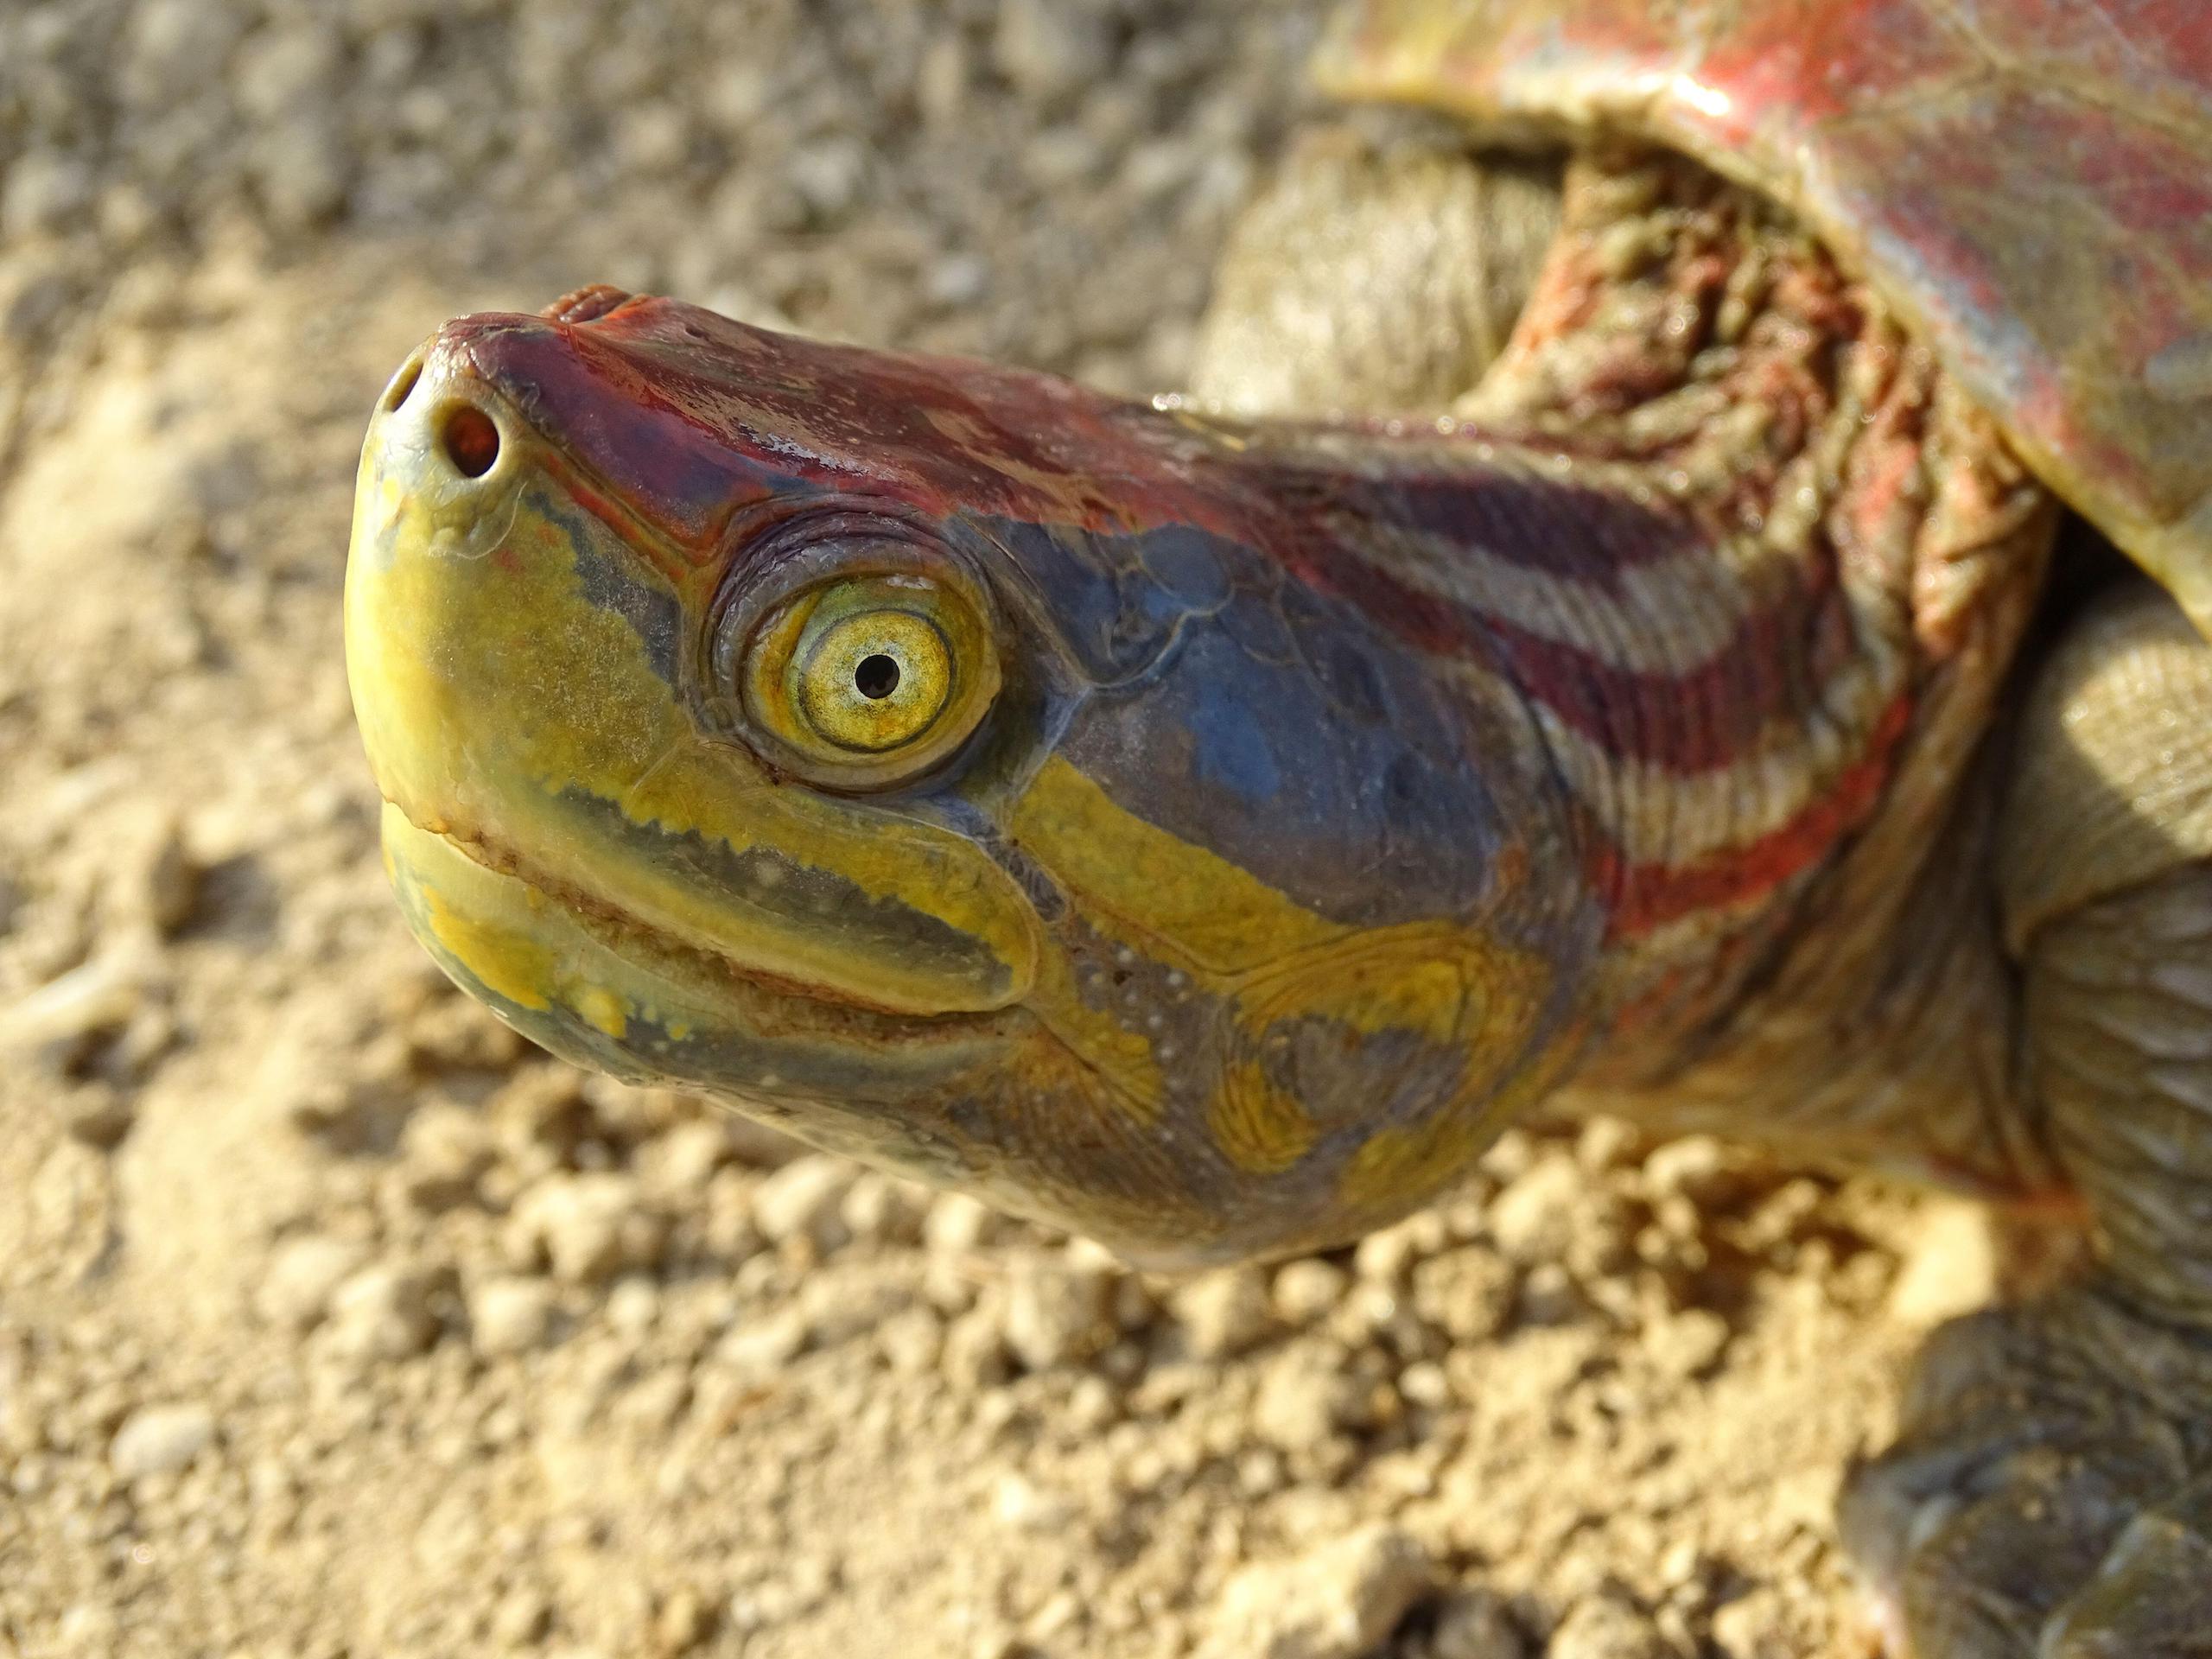 <p>The red-crowned roofed turtle is one of several South Asian species to receive greater international protection thanks to decisions made at the 19<sup>th</sup> CITES summit in Panama (Image: Nariman Vazifdar / Alamy)</p>